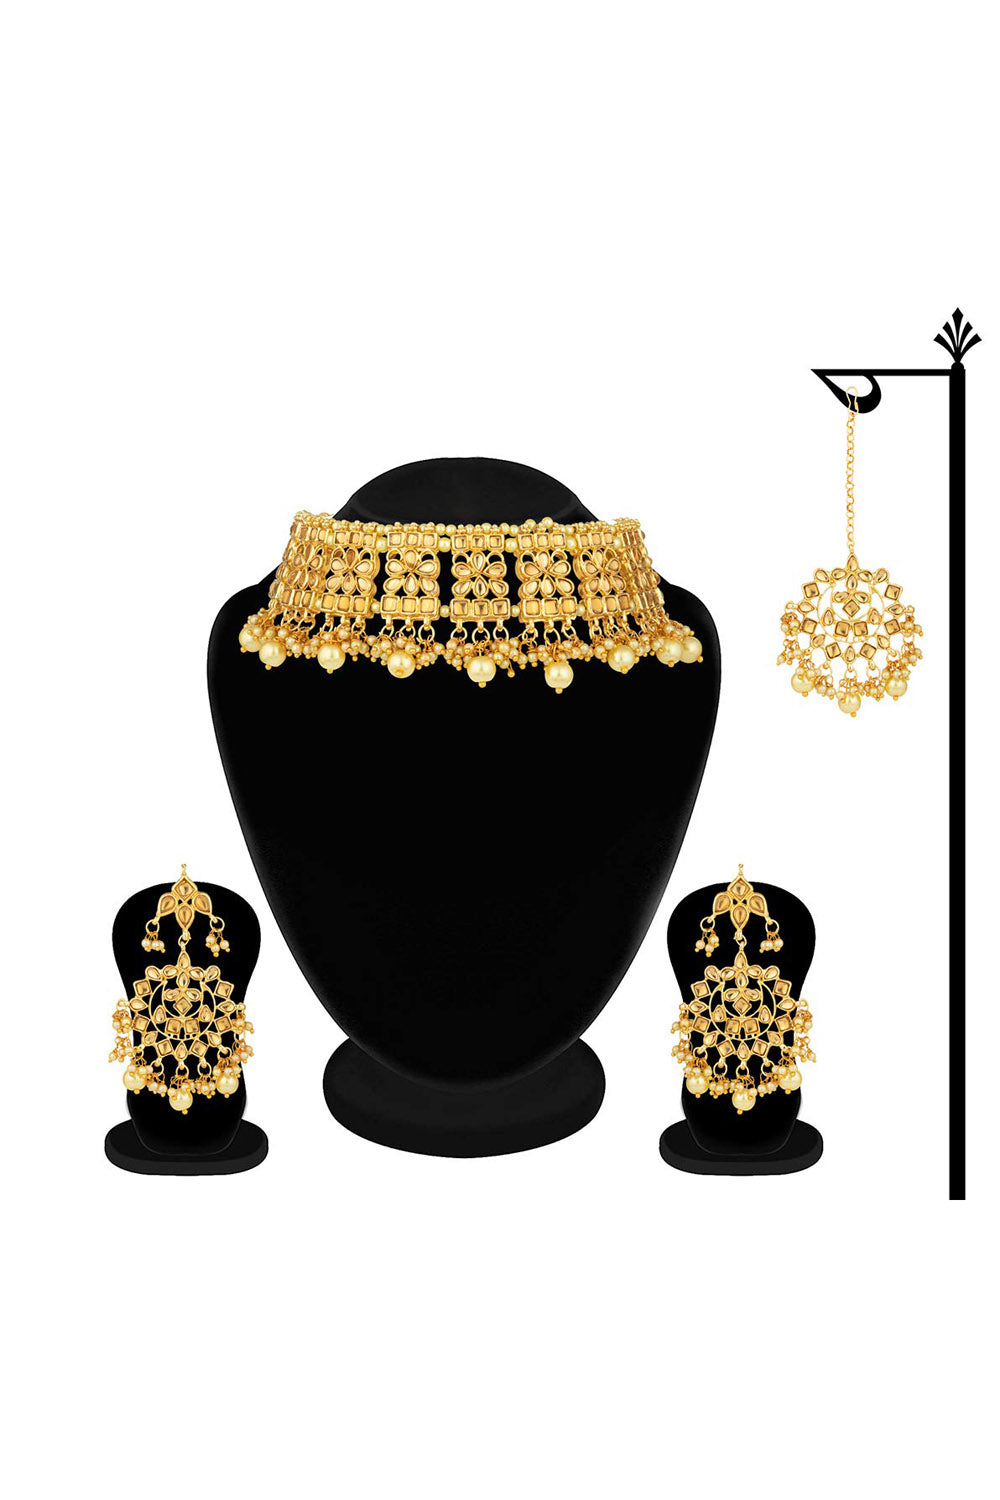 Alloy Necklace with Earrings and Maang Tikka in gold